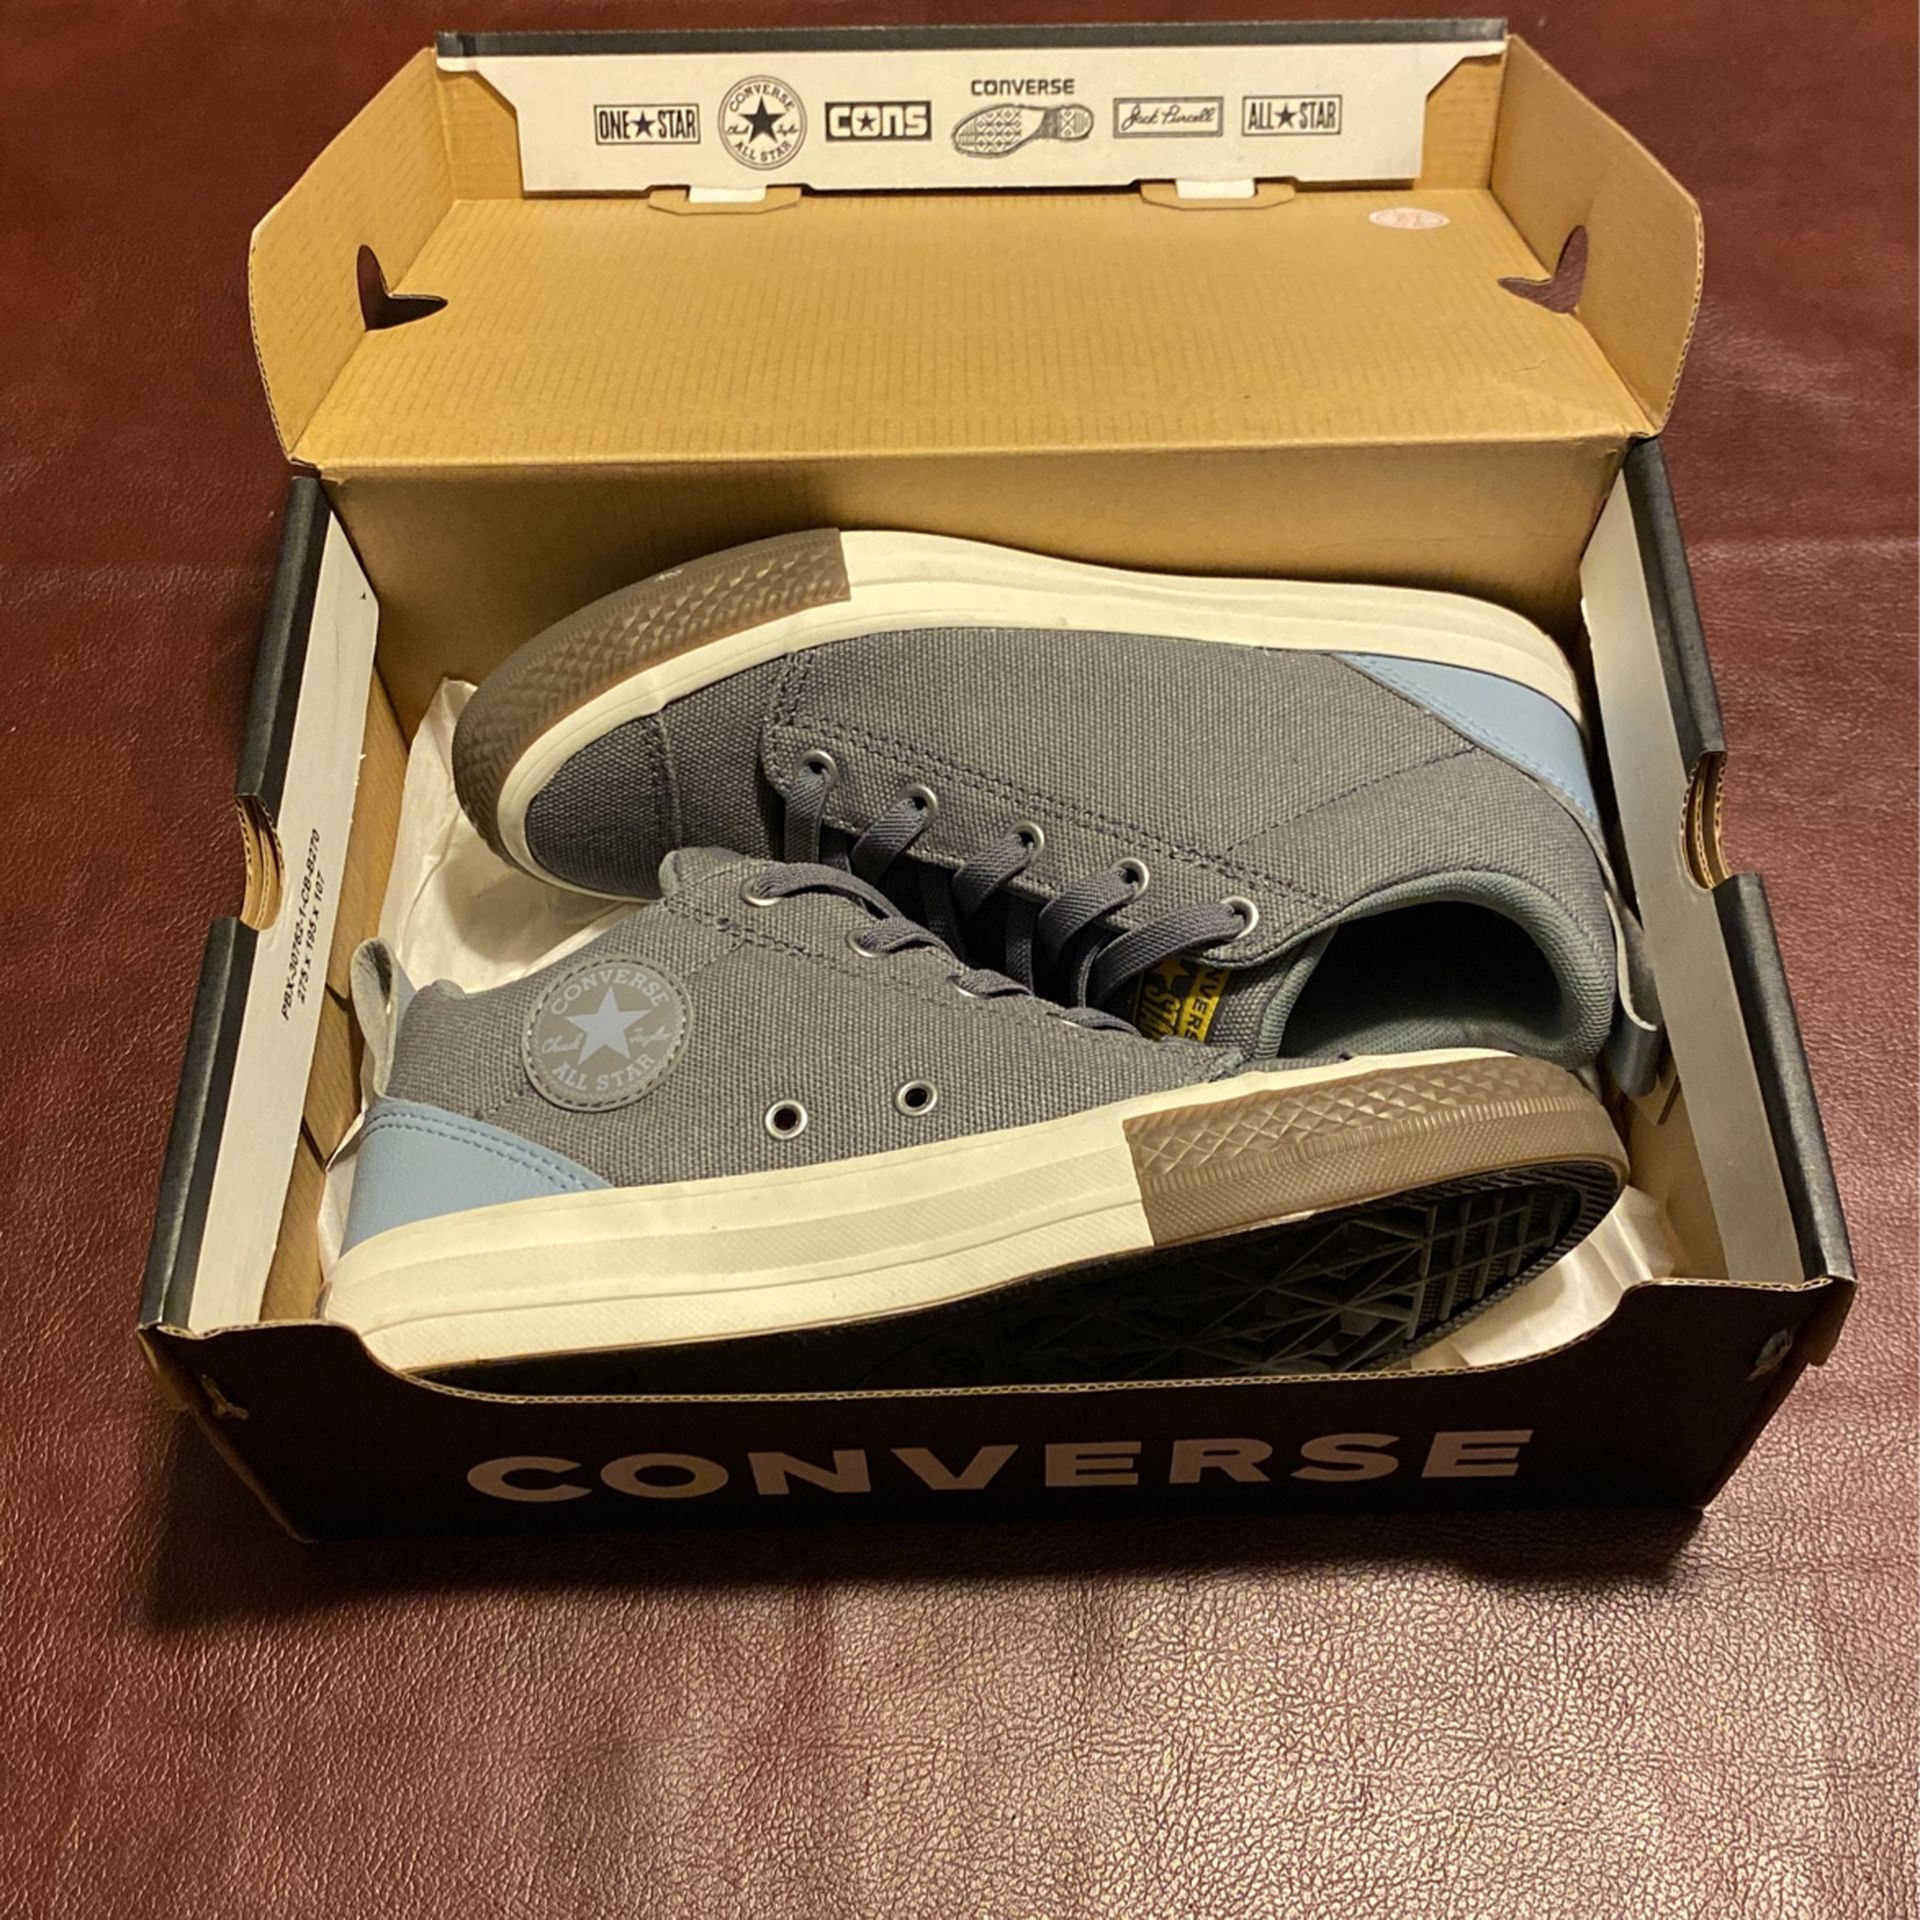 Brand new size 4 converse all-star gym shoes